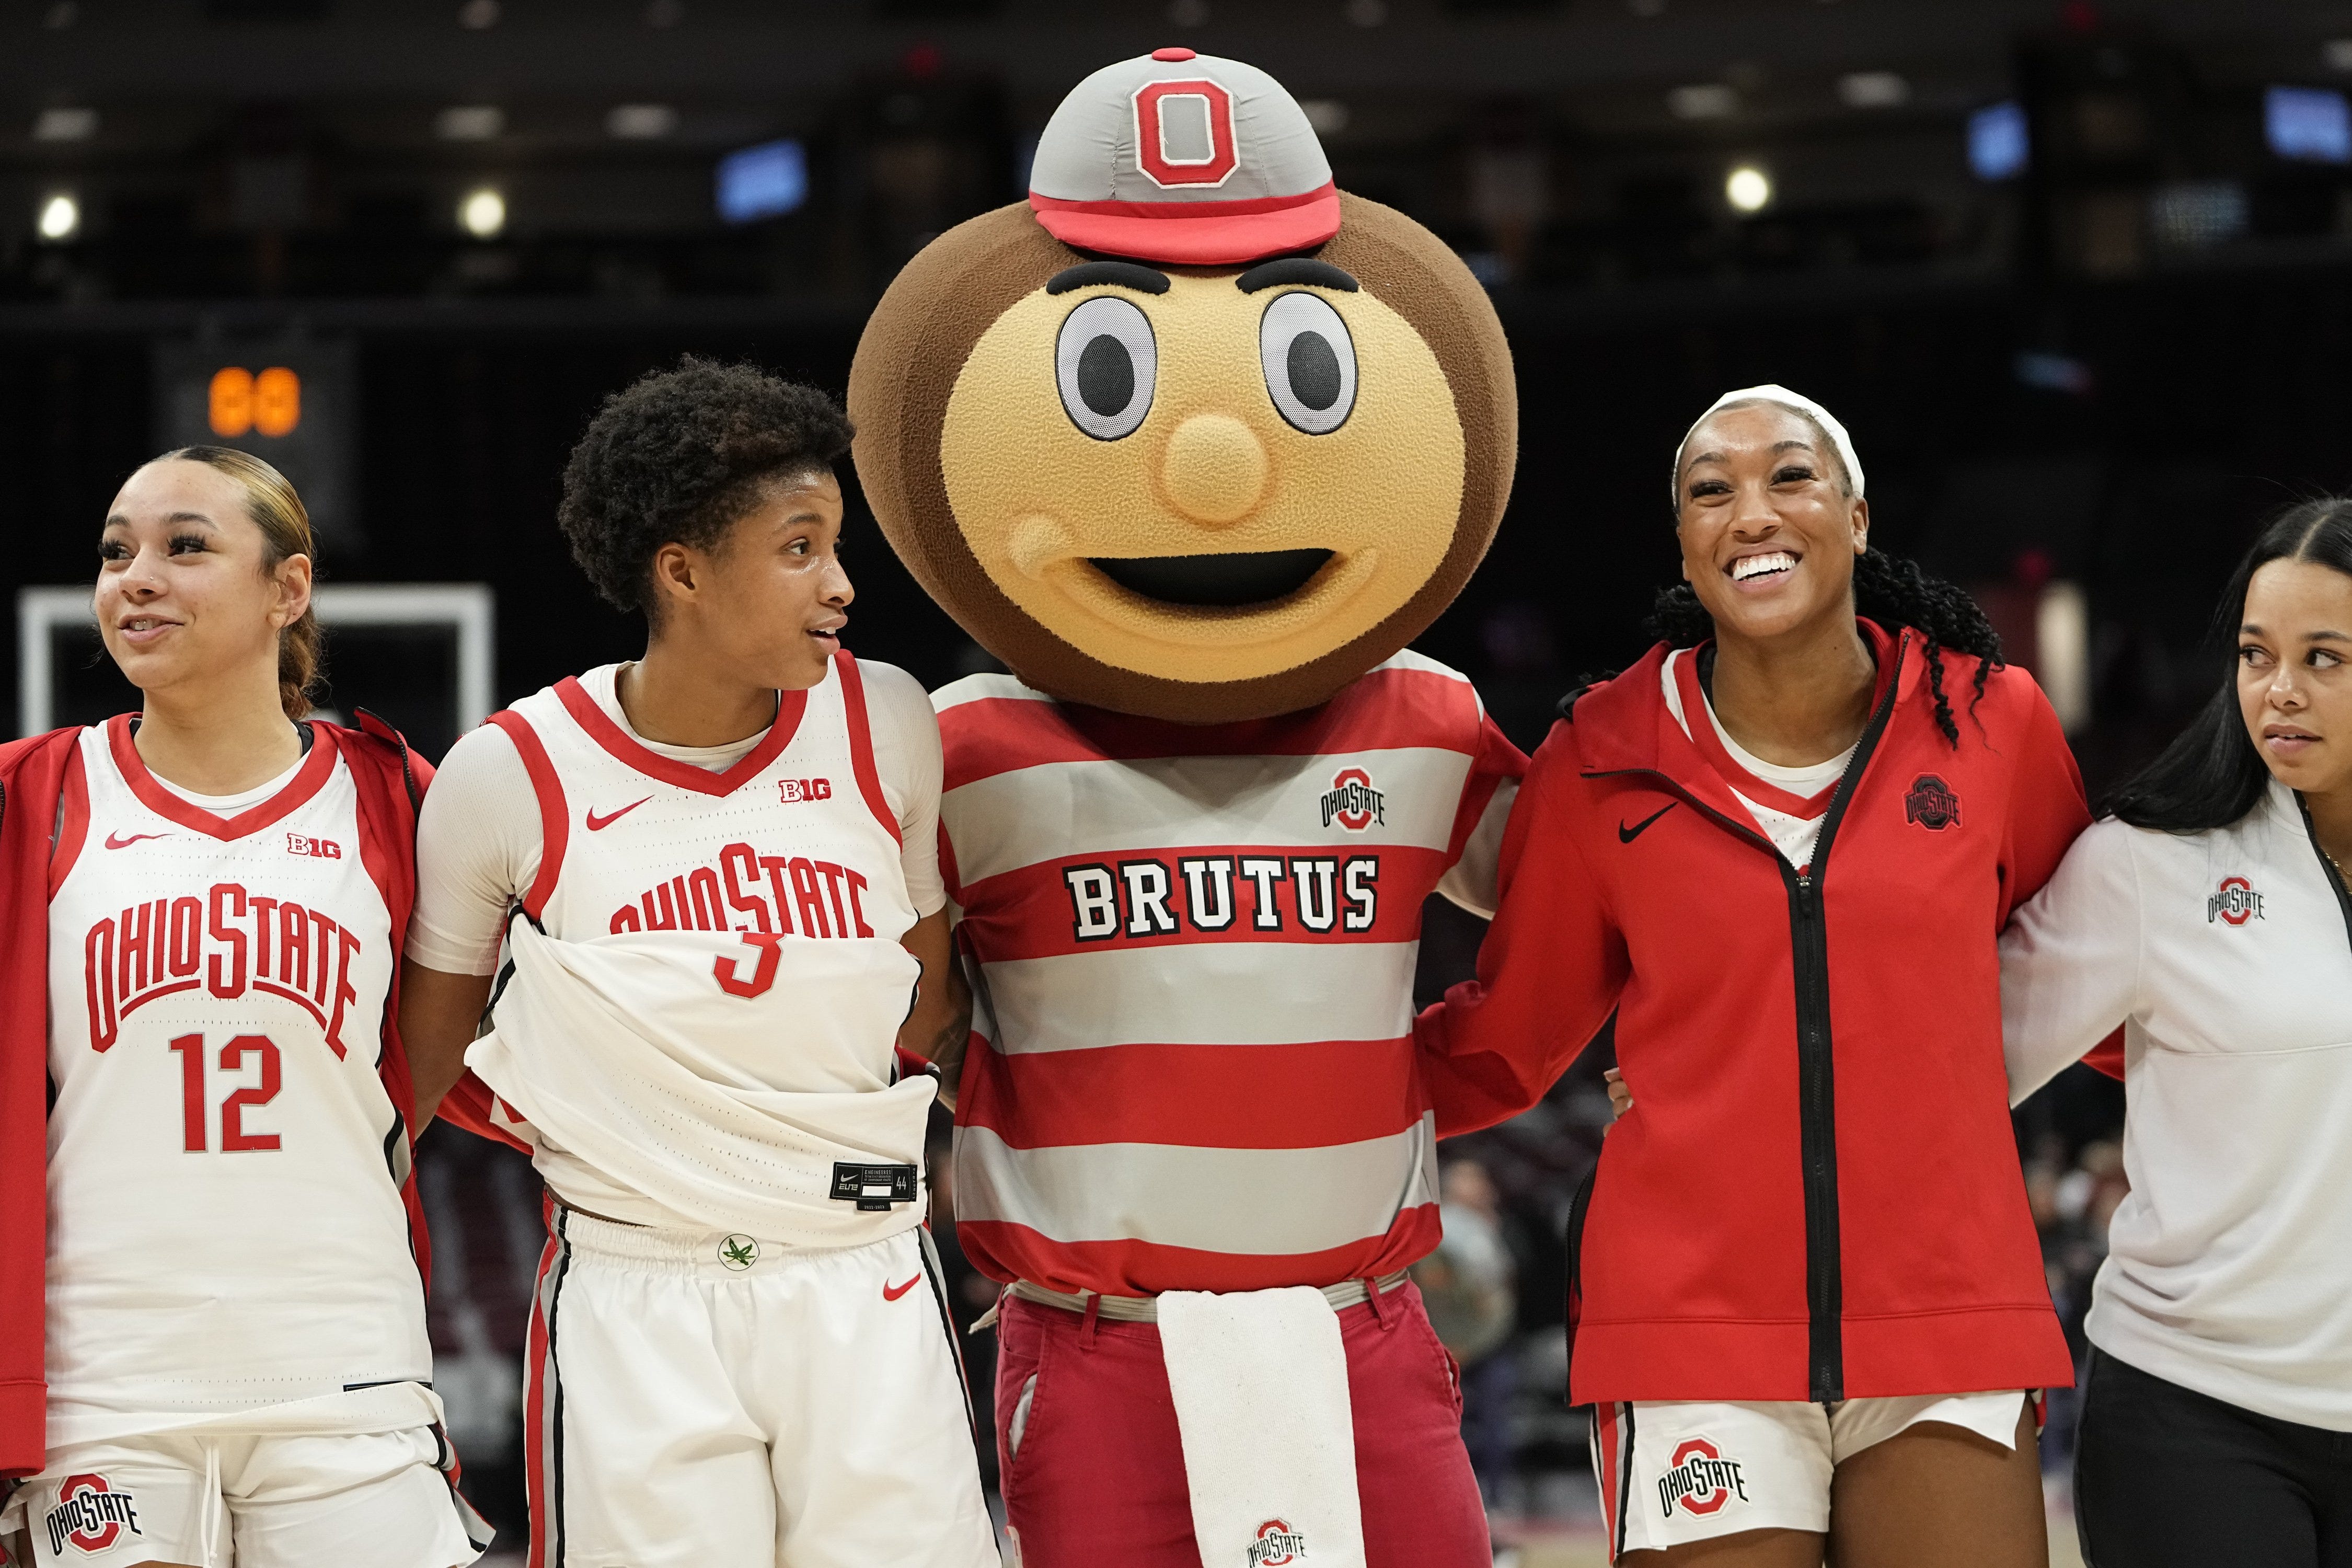 Jan 19, 2023; Columbus, OH, USA; Brutus Buckeye sings Carmen Ohio with arms around guard Hevynne Bristow (3) and forward Cotie McMahon (32) following their 84-54 win over the Northwestern Wildcats in the NCAA women's basketball game at Value City Arena